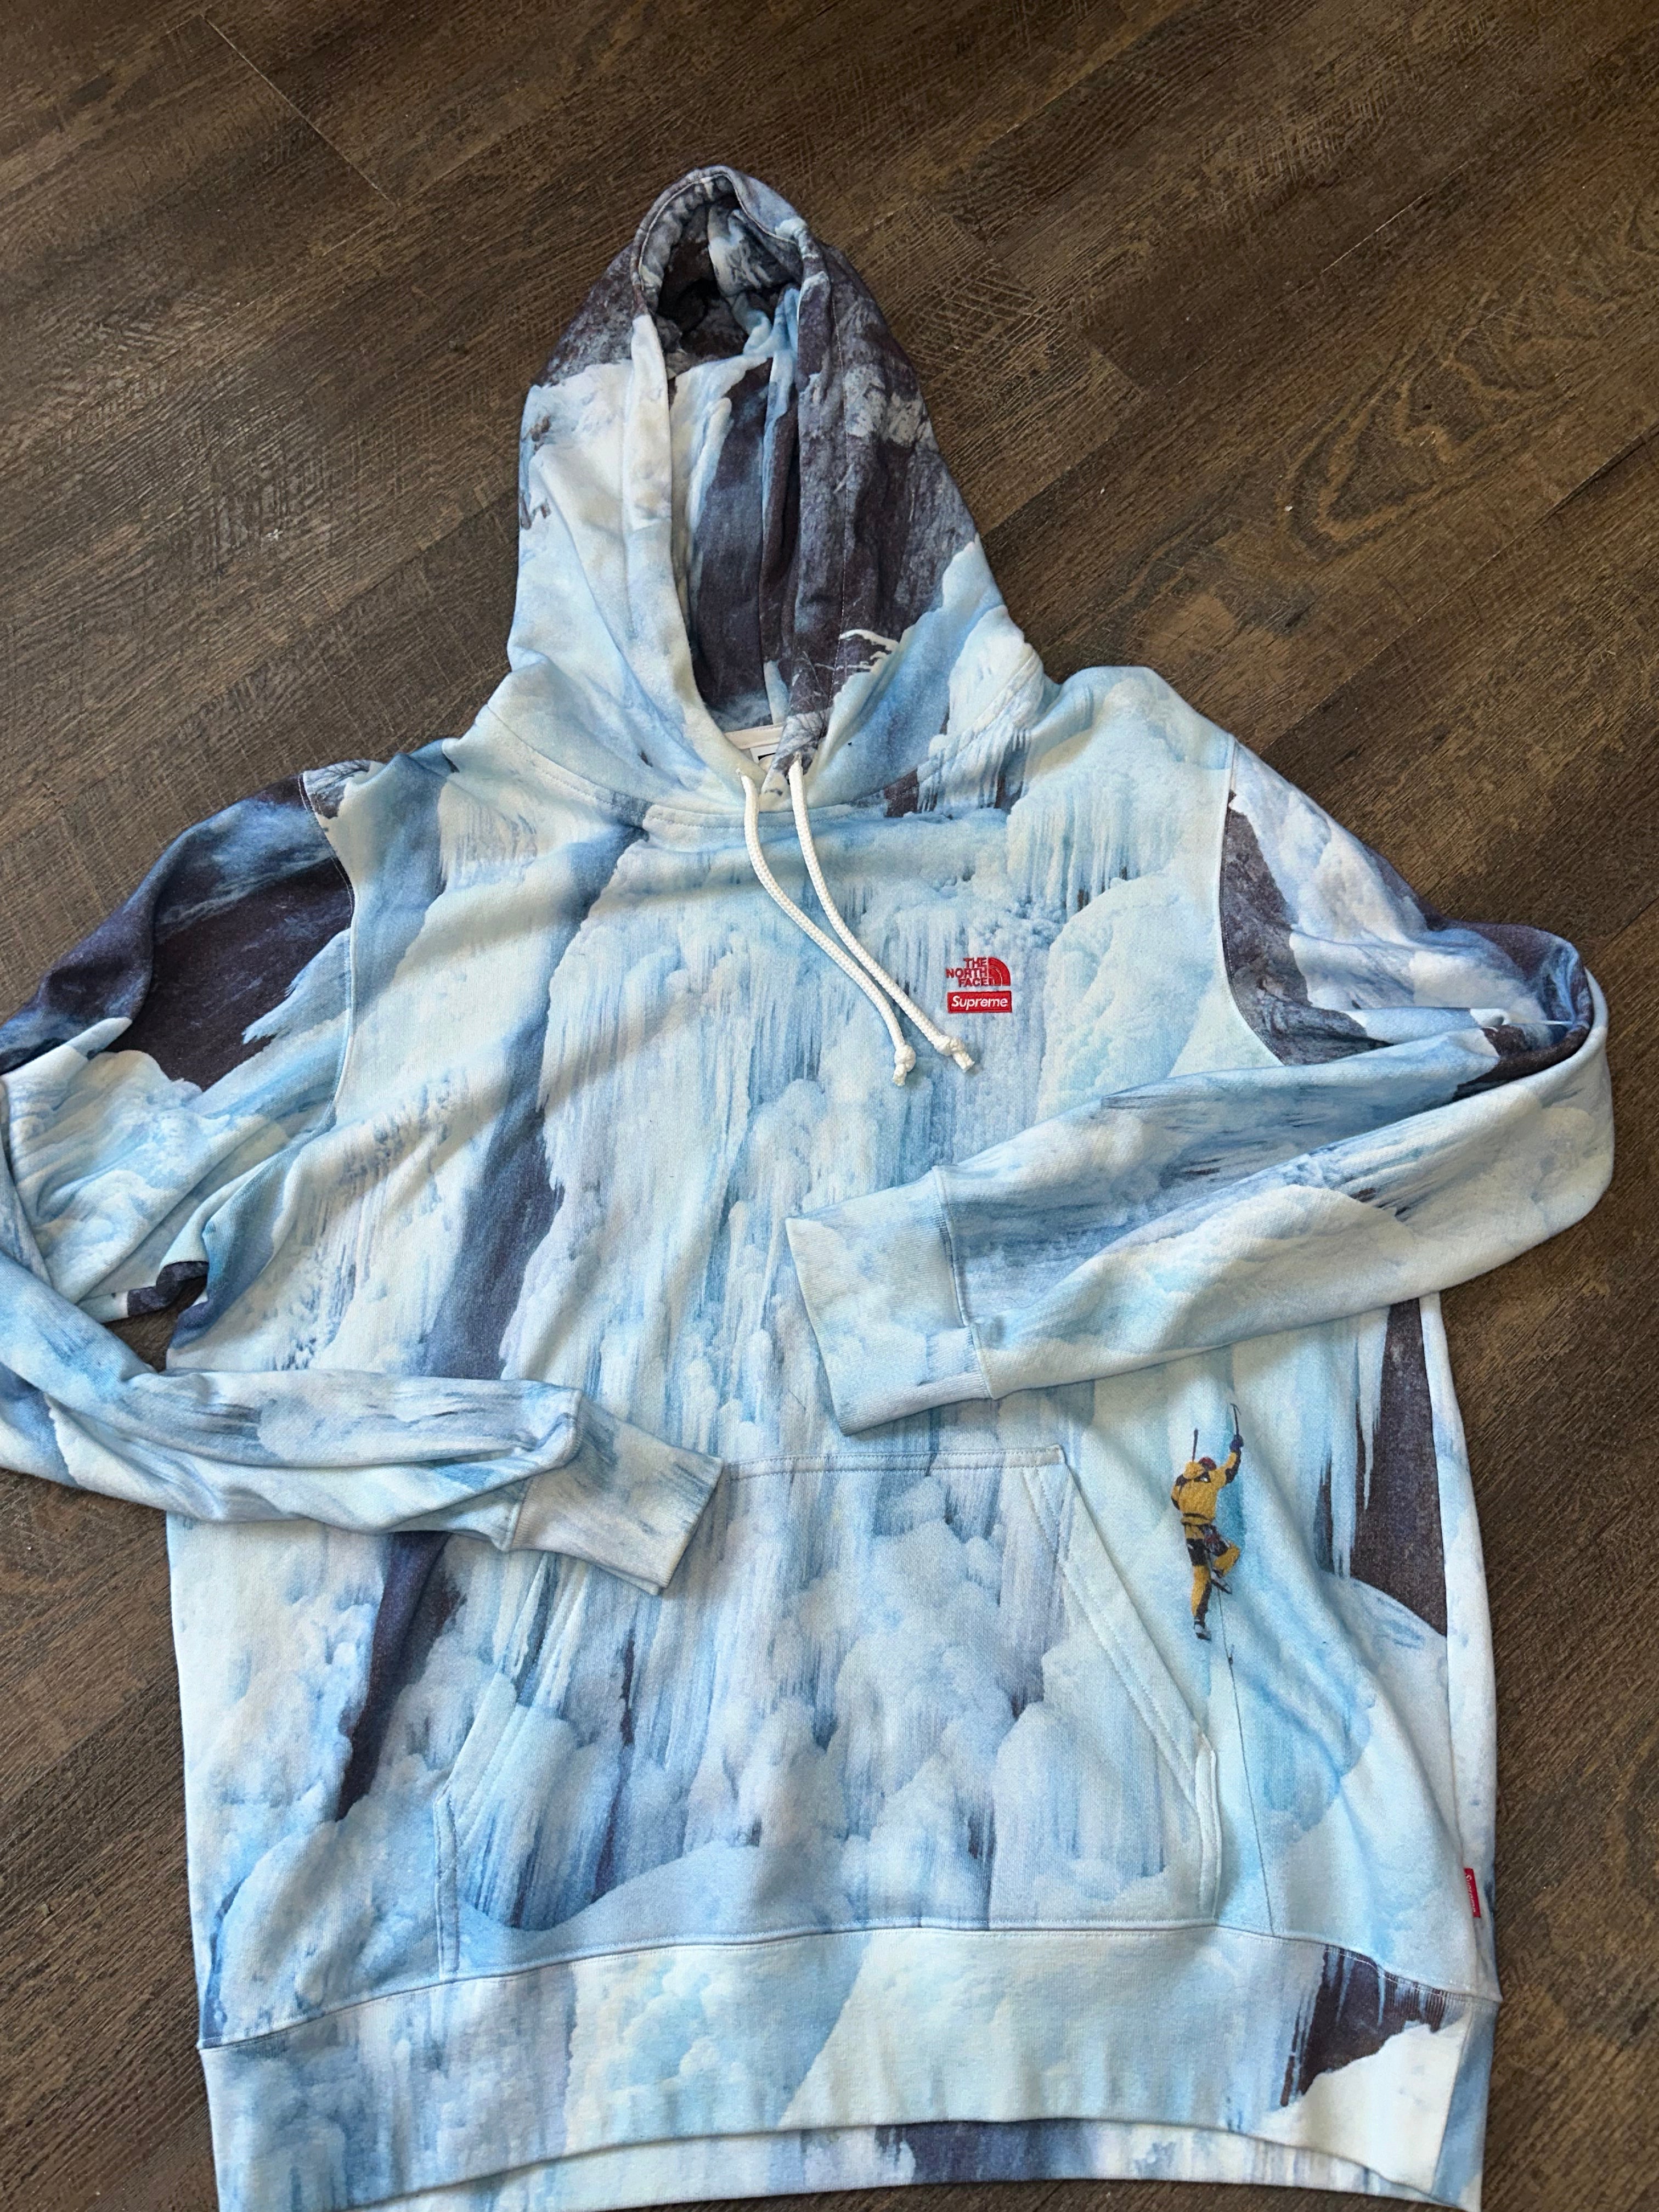 Supreme x The North Face “Ice Climb” Hoodie